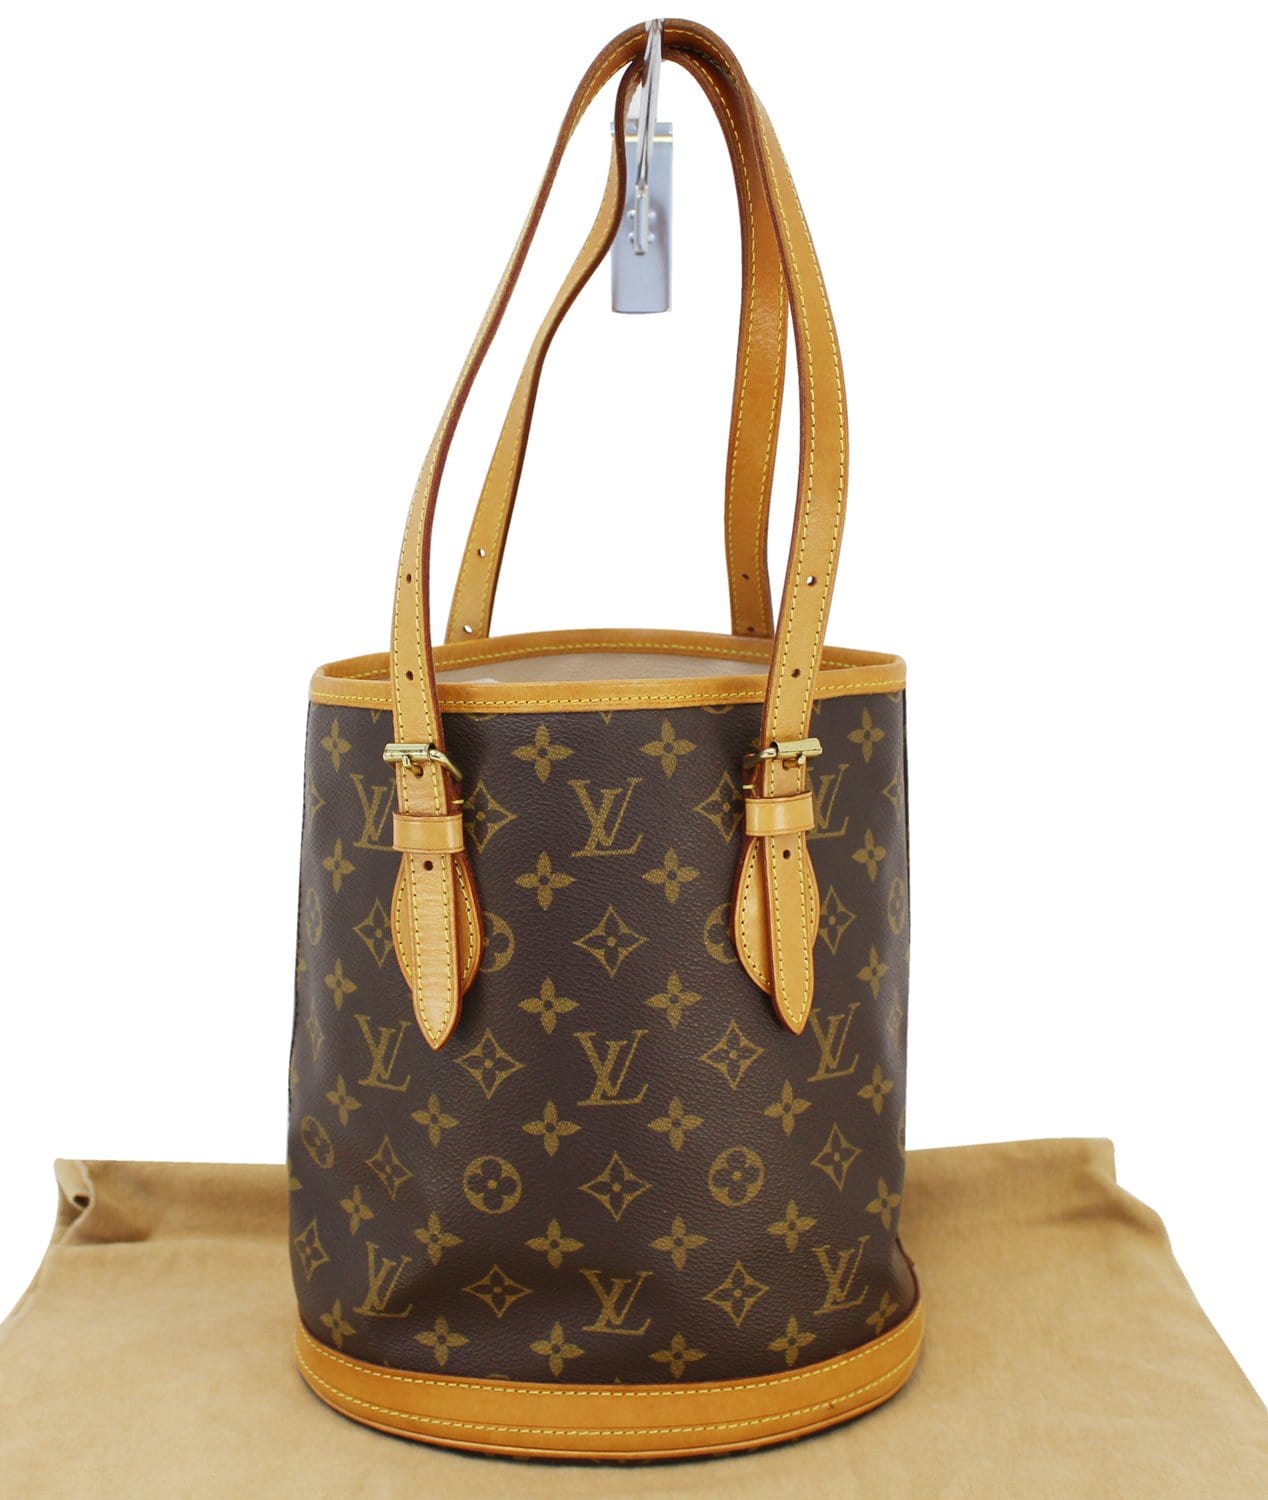 How I Clean & Care For My Vintage Louis Vuitton Bucket Bag